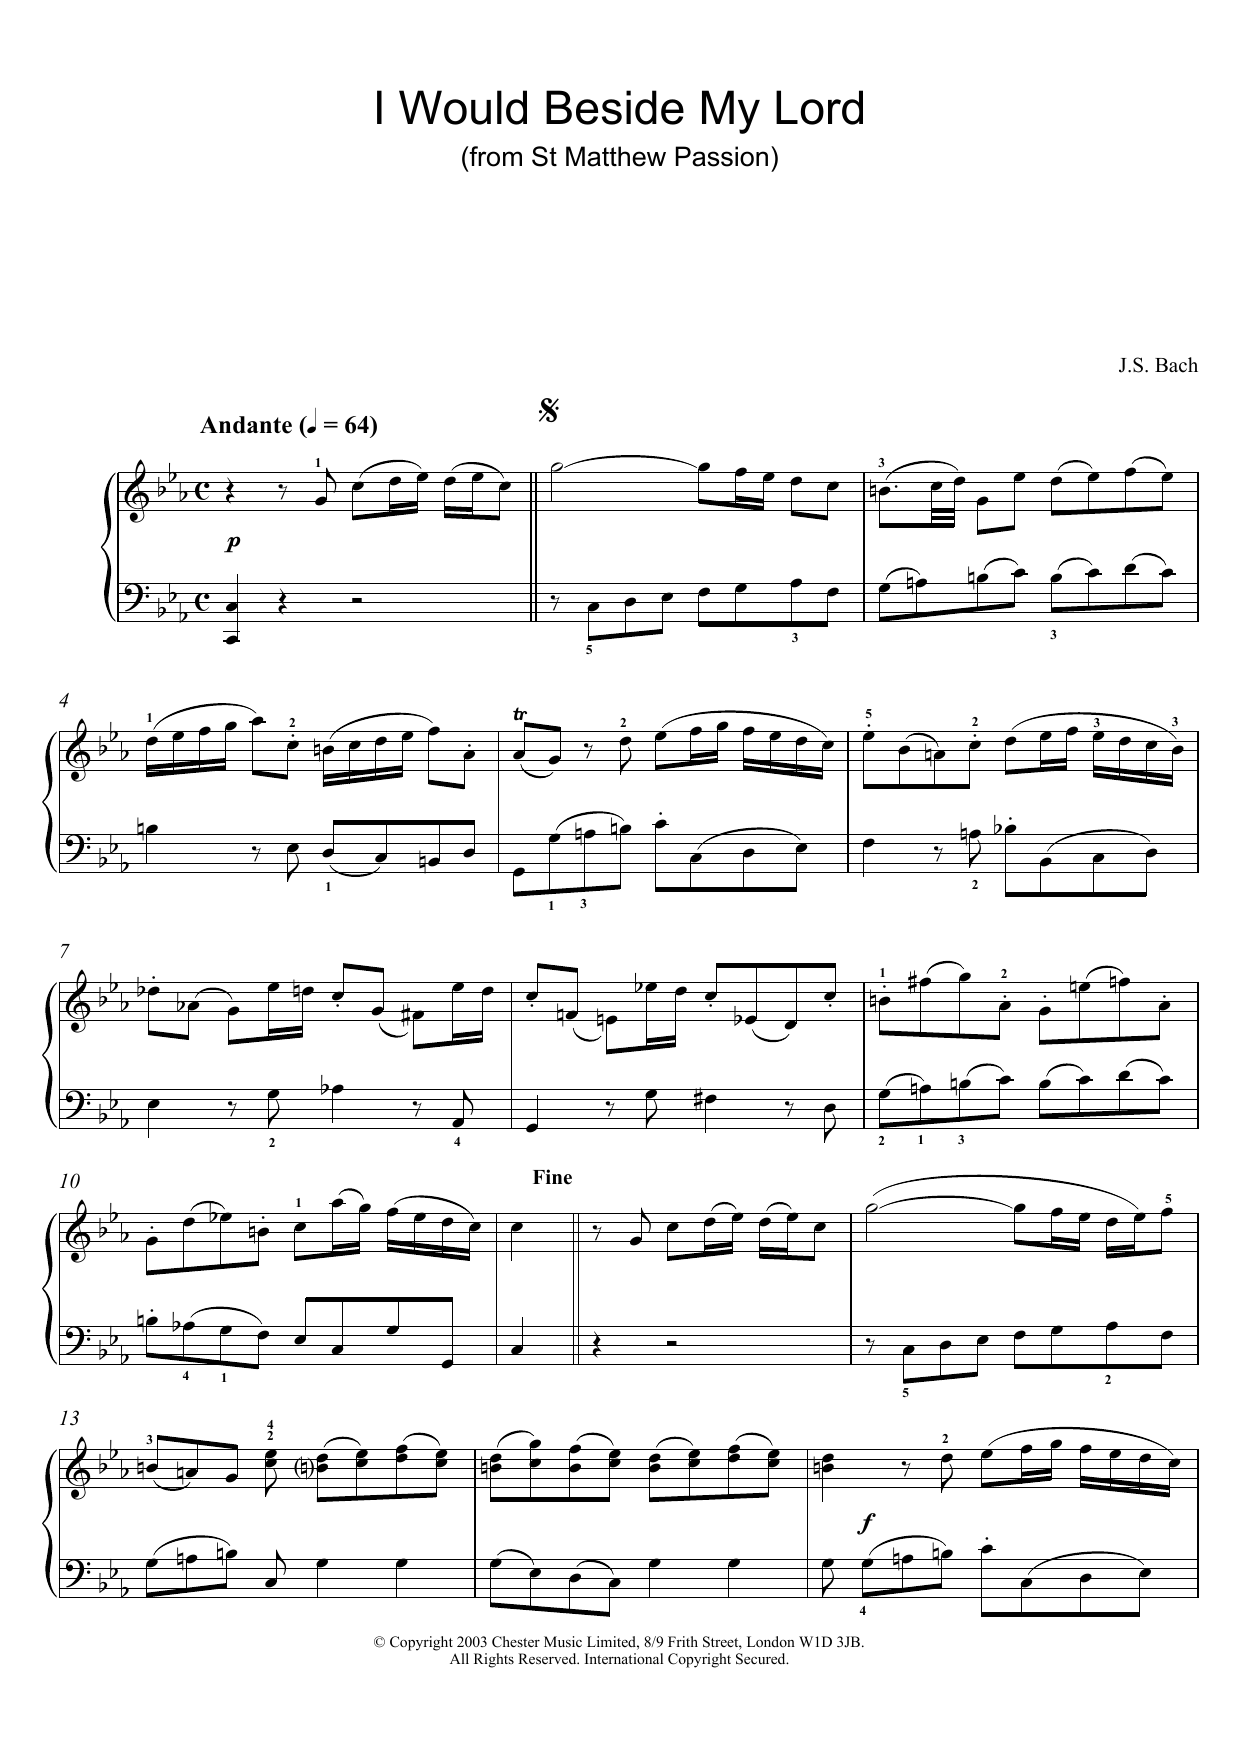 J.S. Bach I Would Beside My Lord (from St Matthew Passion) sheet music preview music notes and score for Piano including 4 page(s)